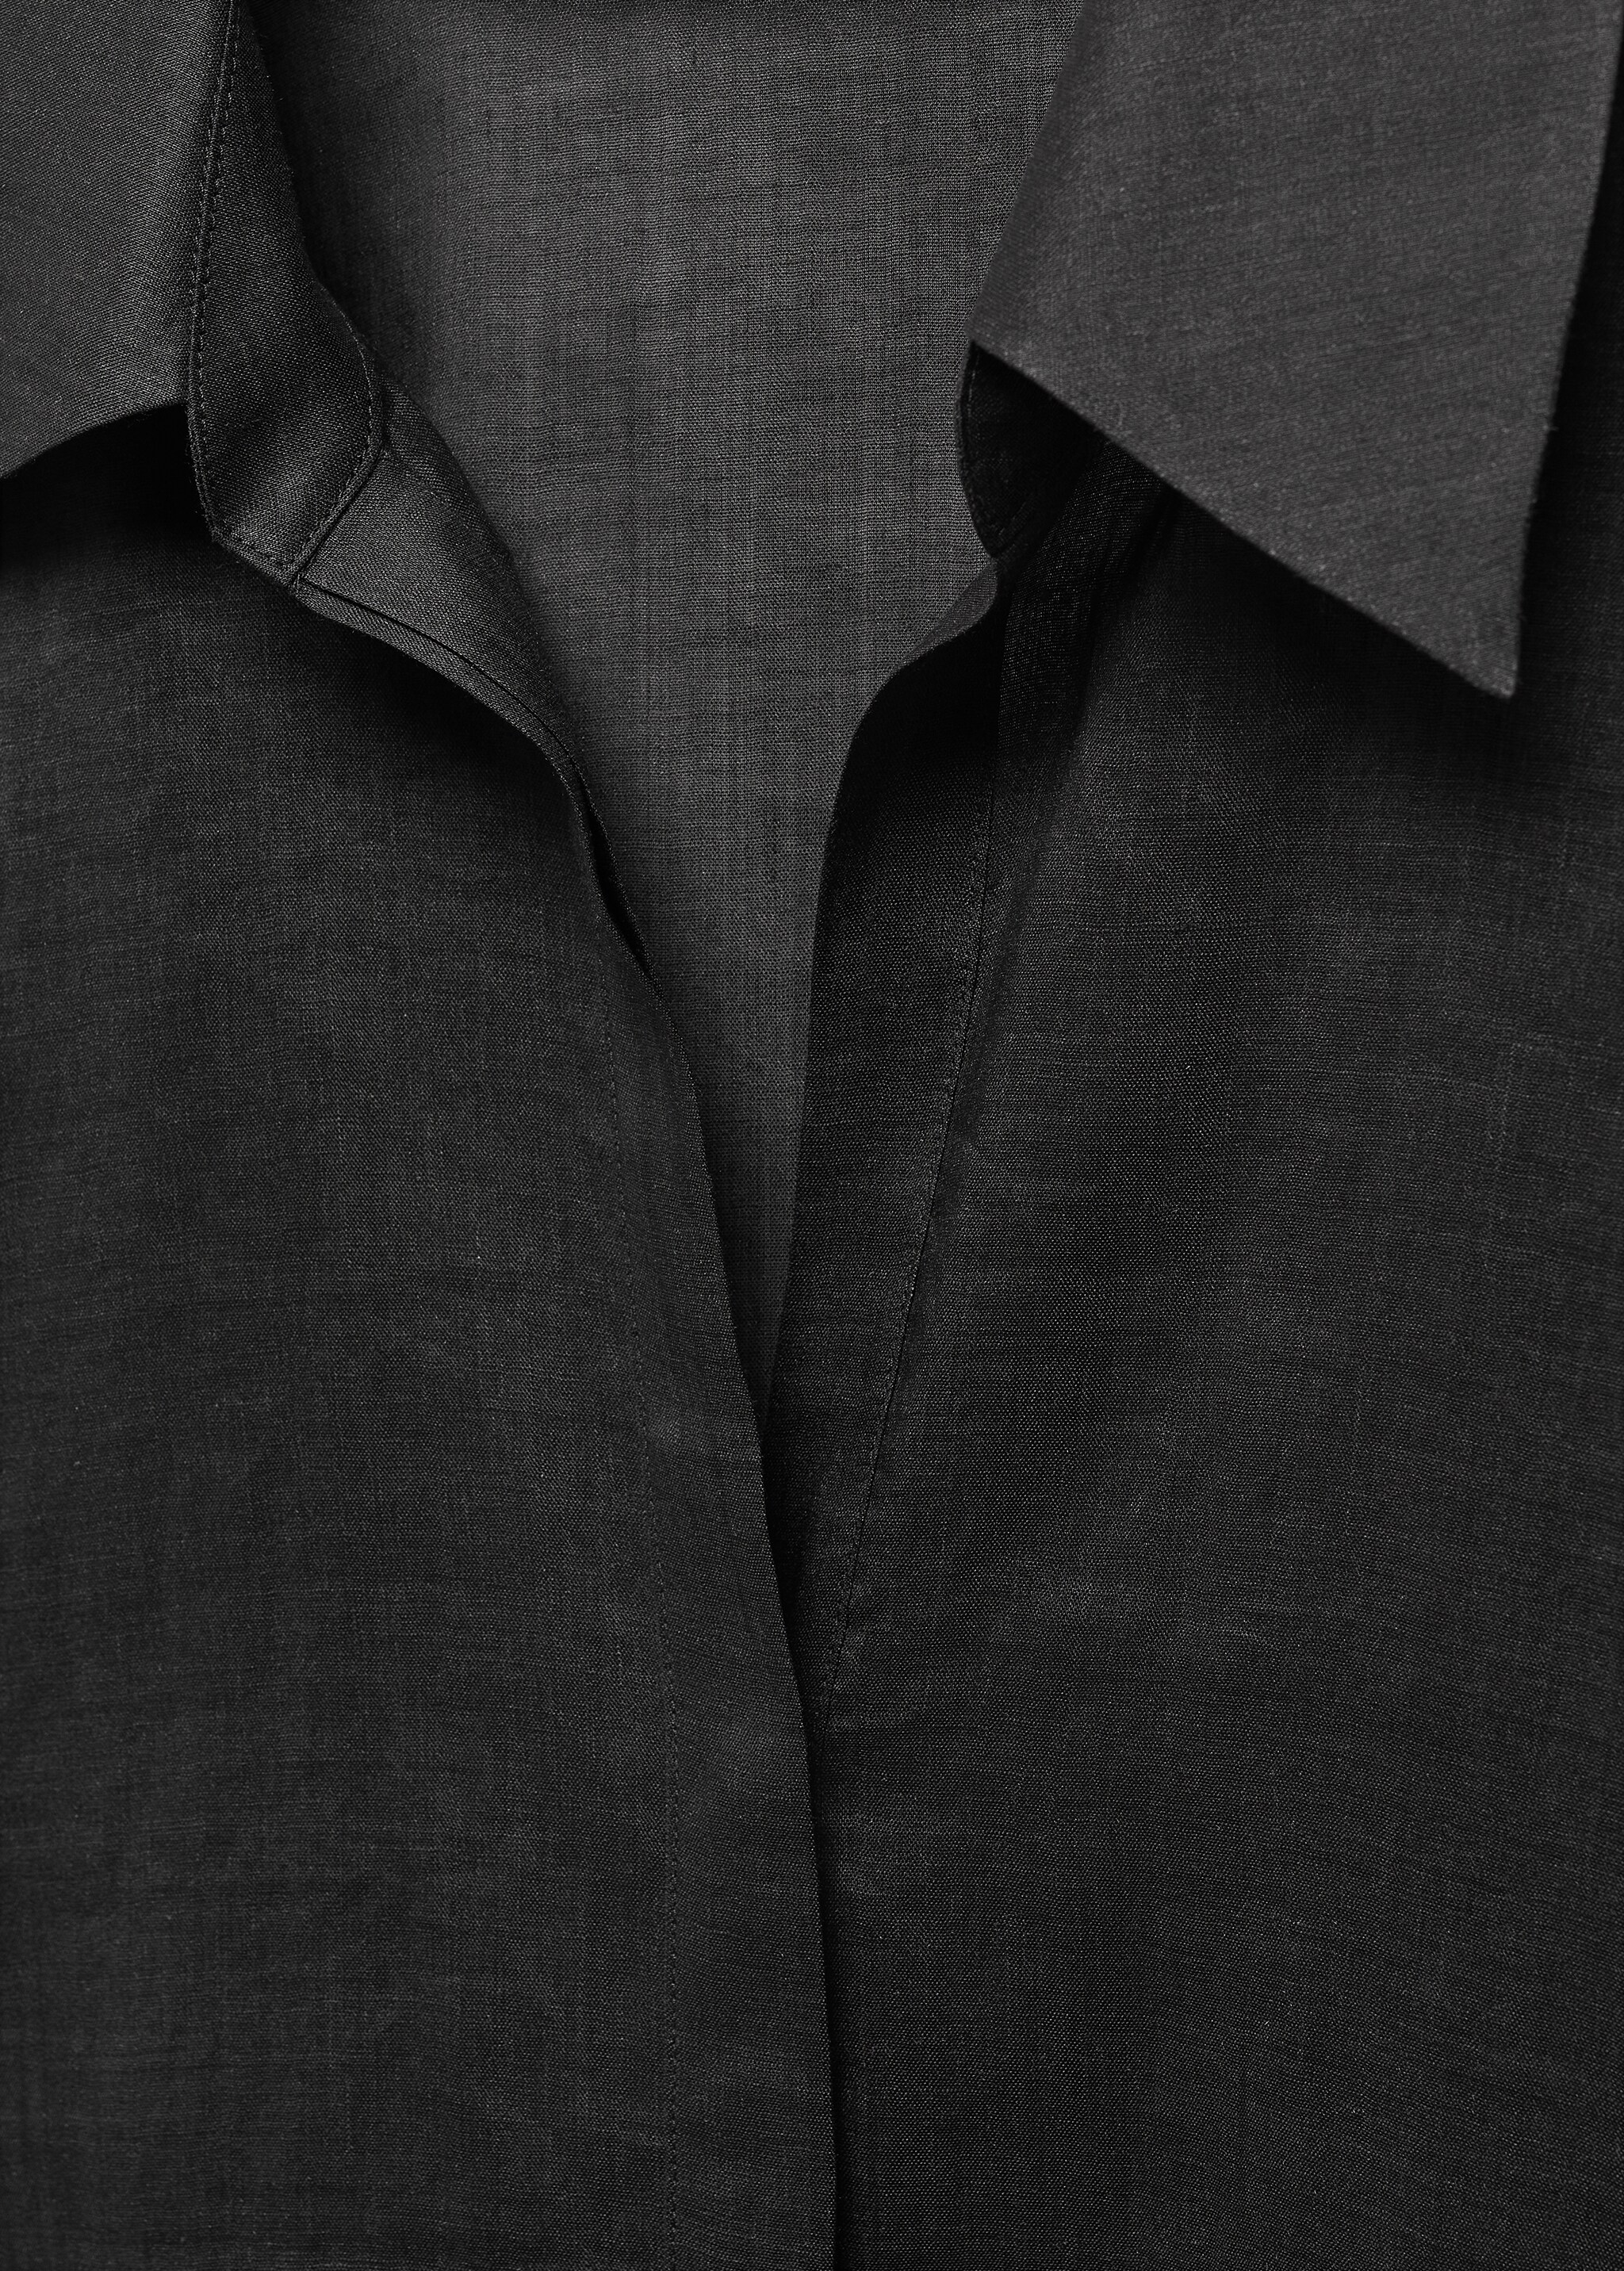 Ramie shirt with hidden buttons - Details of the article 8